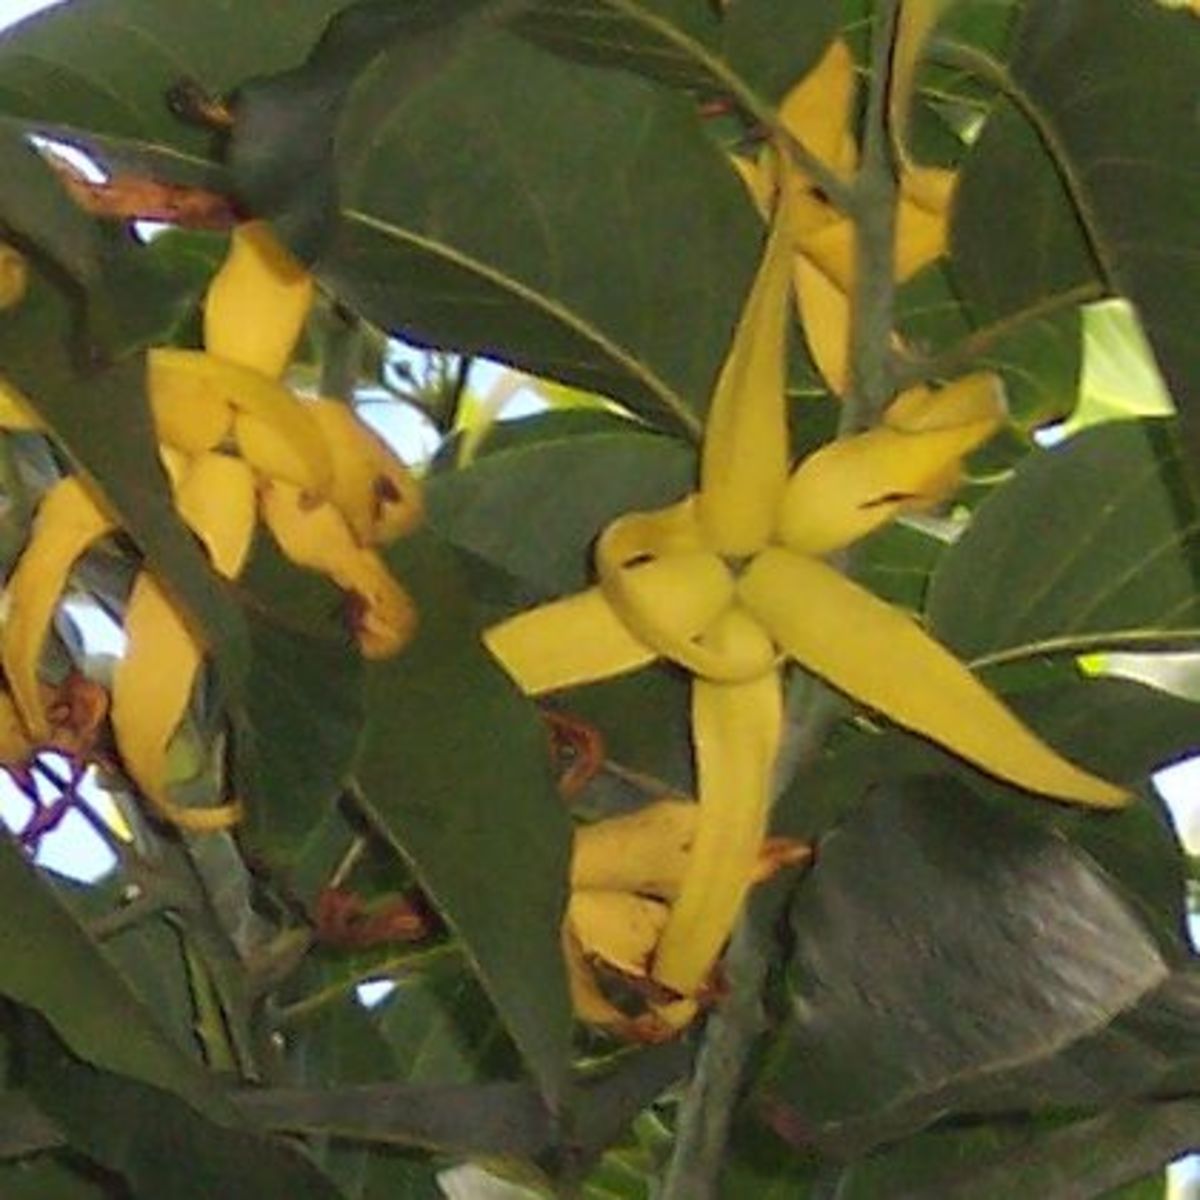 Flowers of the Cananga Odorata tree, from which Ylang Ylang oil is distilled.